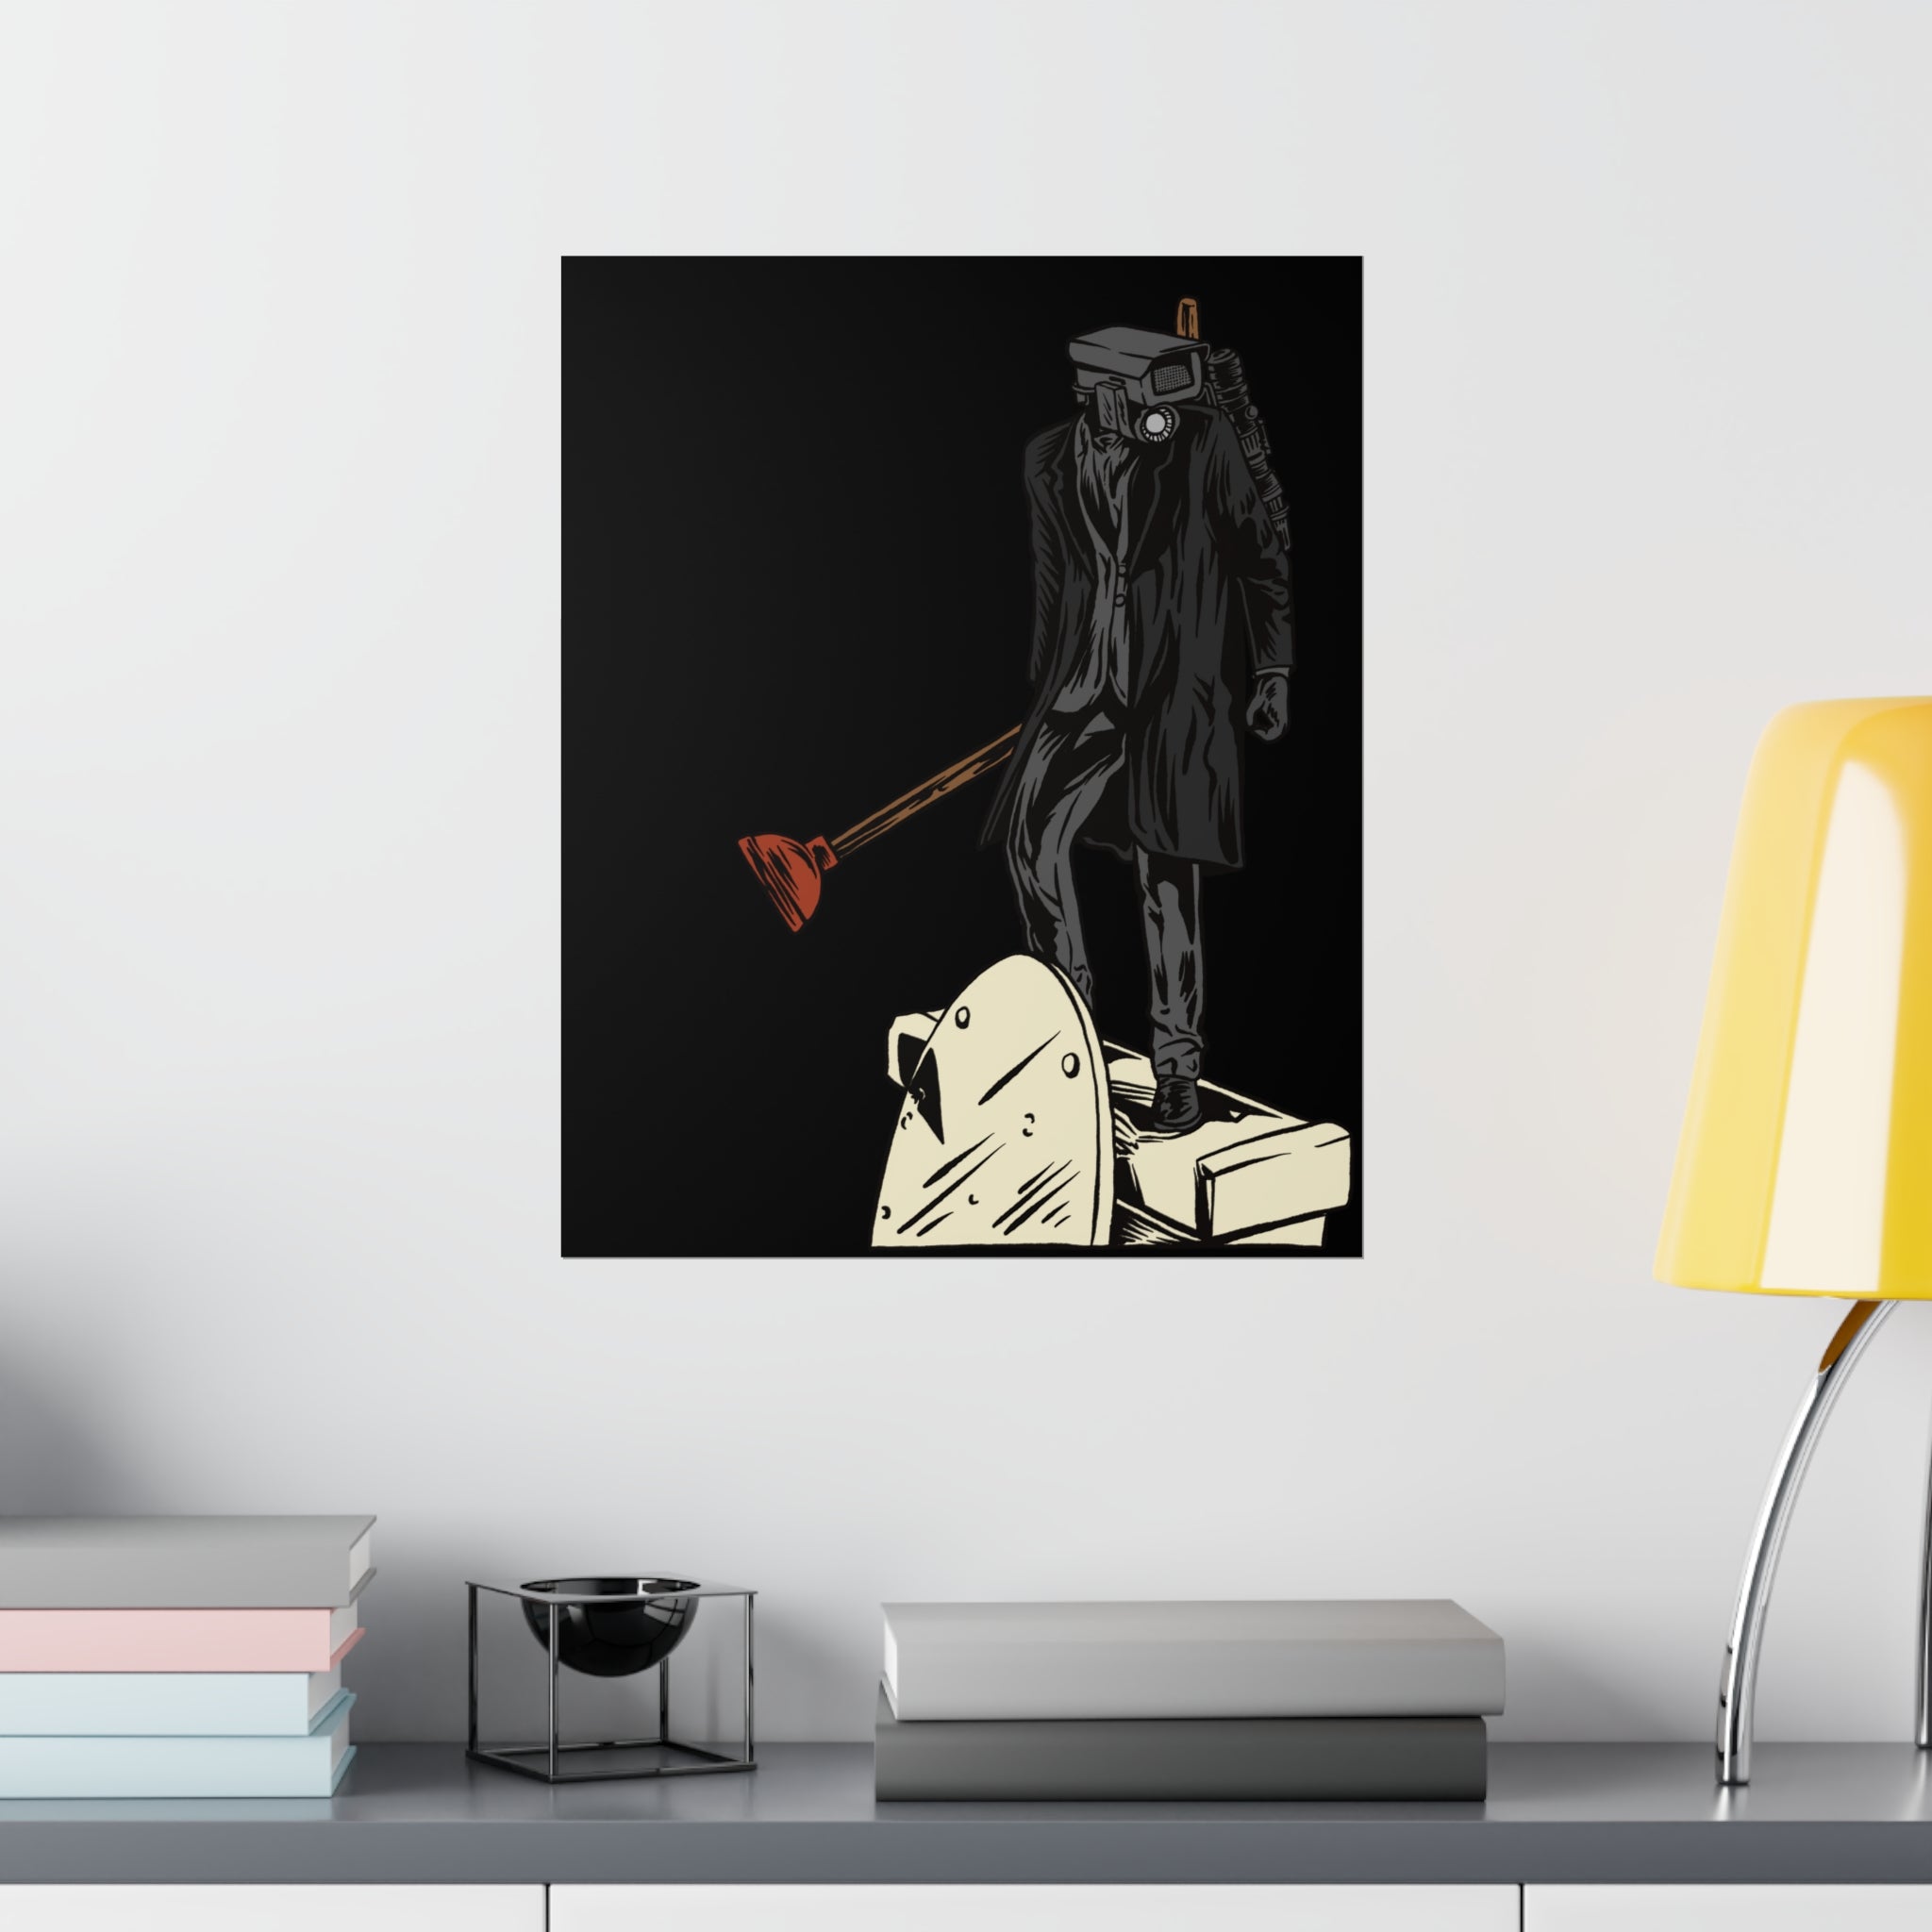 Plungerman art on black matte poster hung over credenza with lamp and books